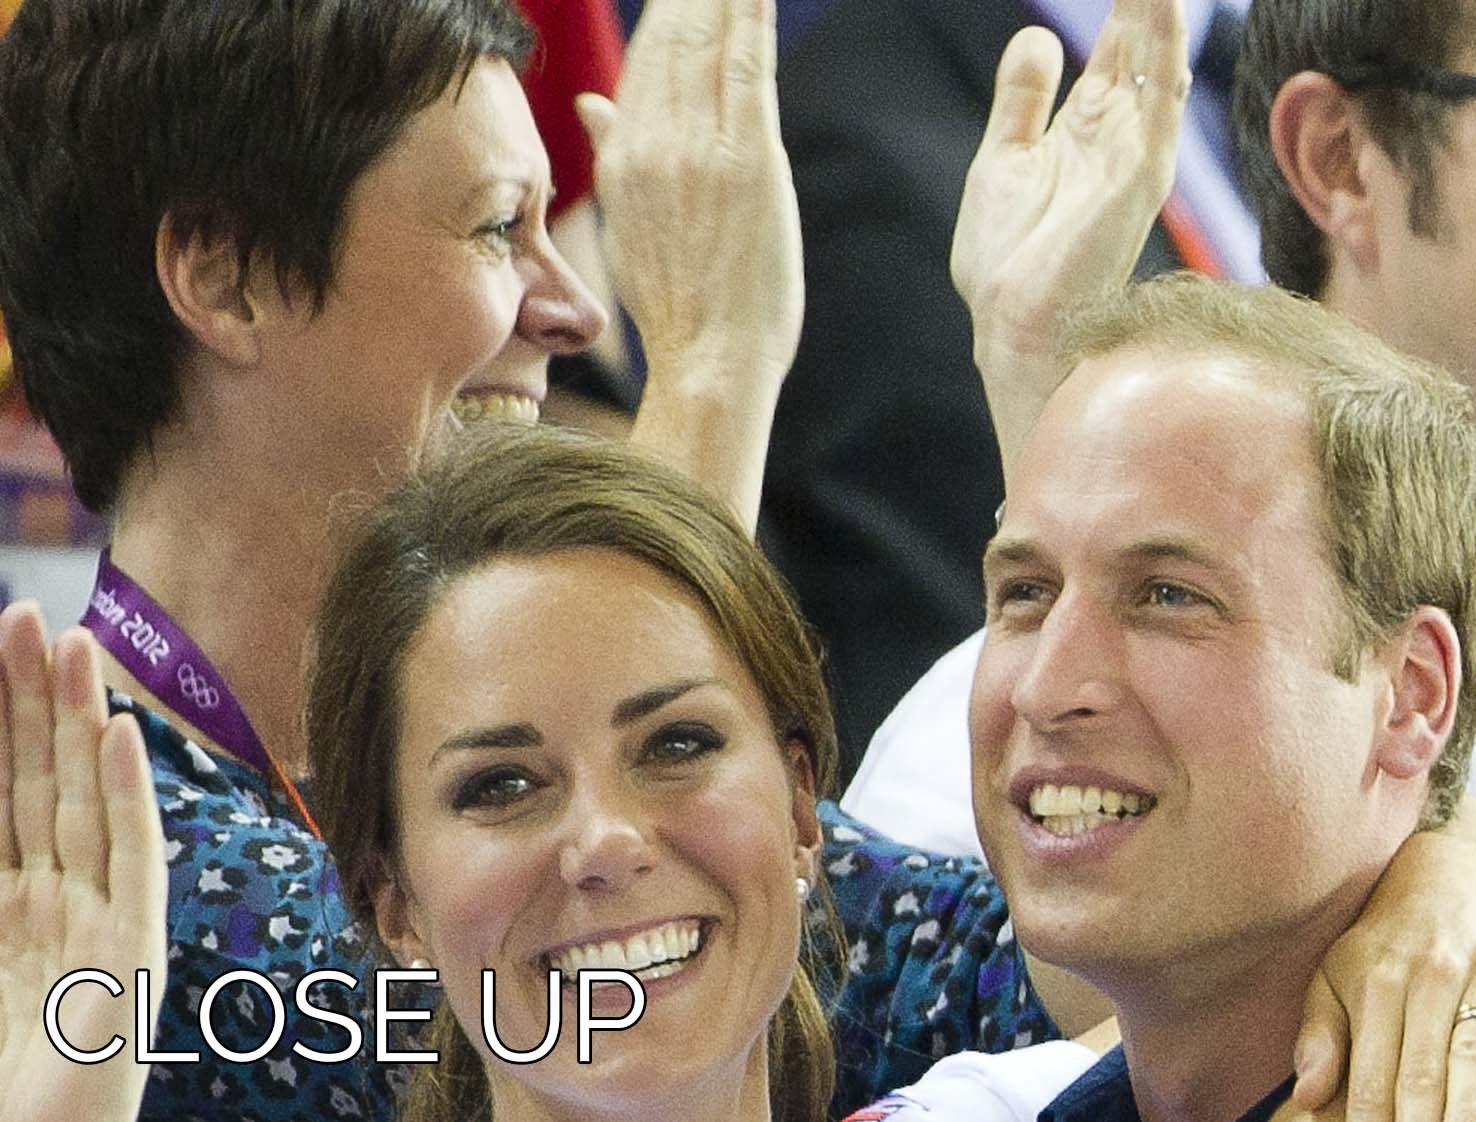 Prince William and Kate hugging at the 2012 Olympics 3 Split Panel Canvas Print - Canvas Art Rocks - 3